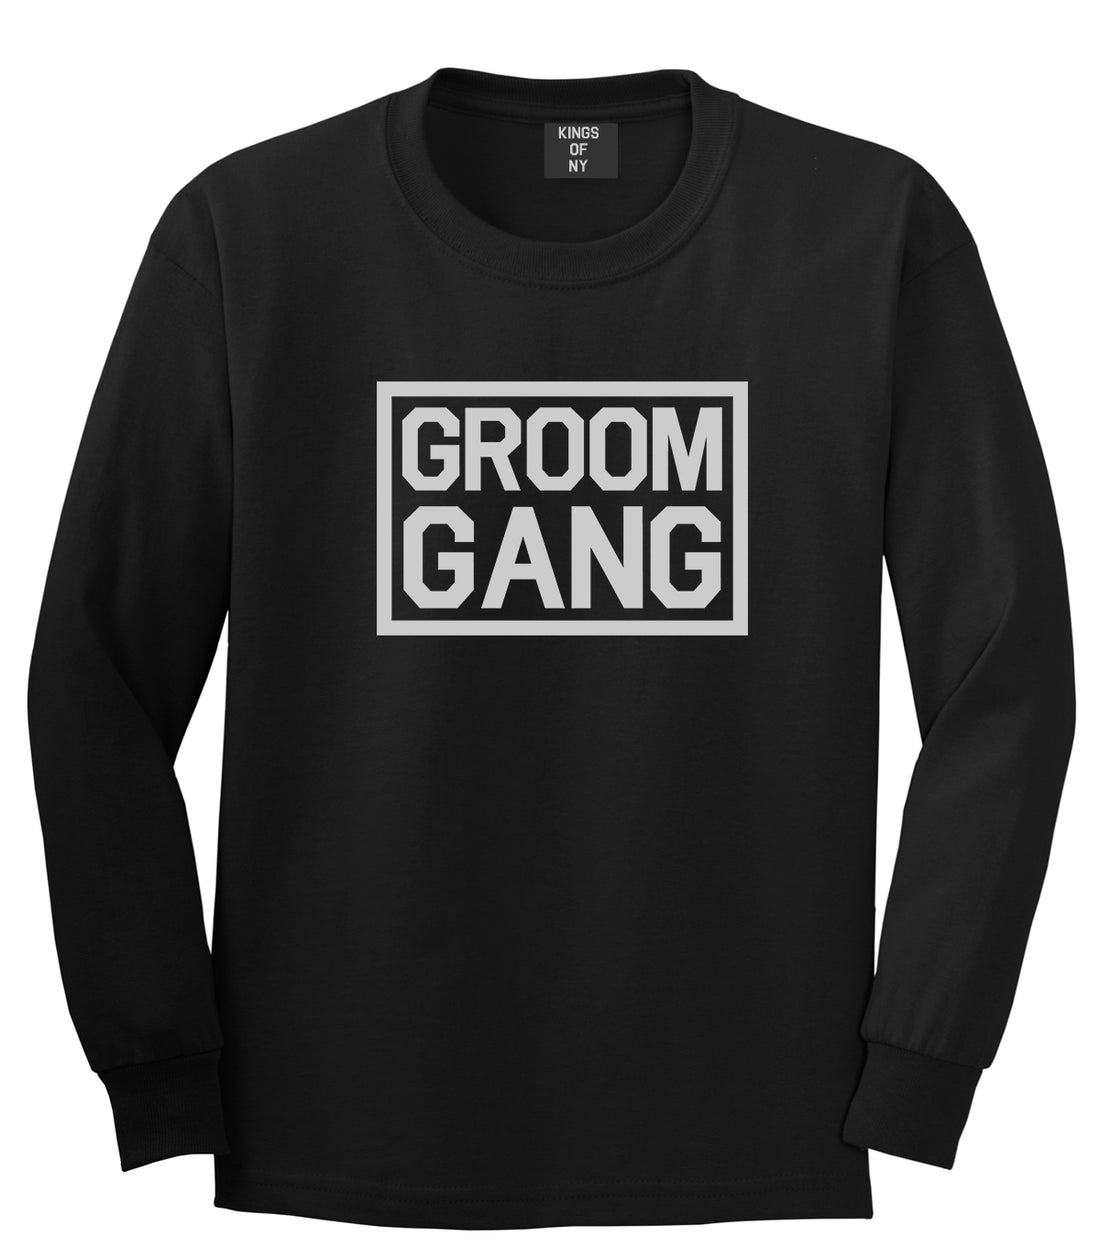 Groom Gang Bachelor Party Black Long Sleeve T-Shirt by Kings Of NY